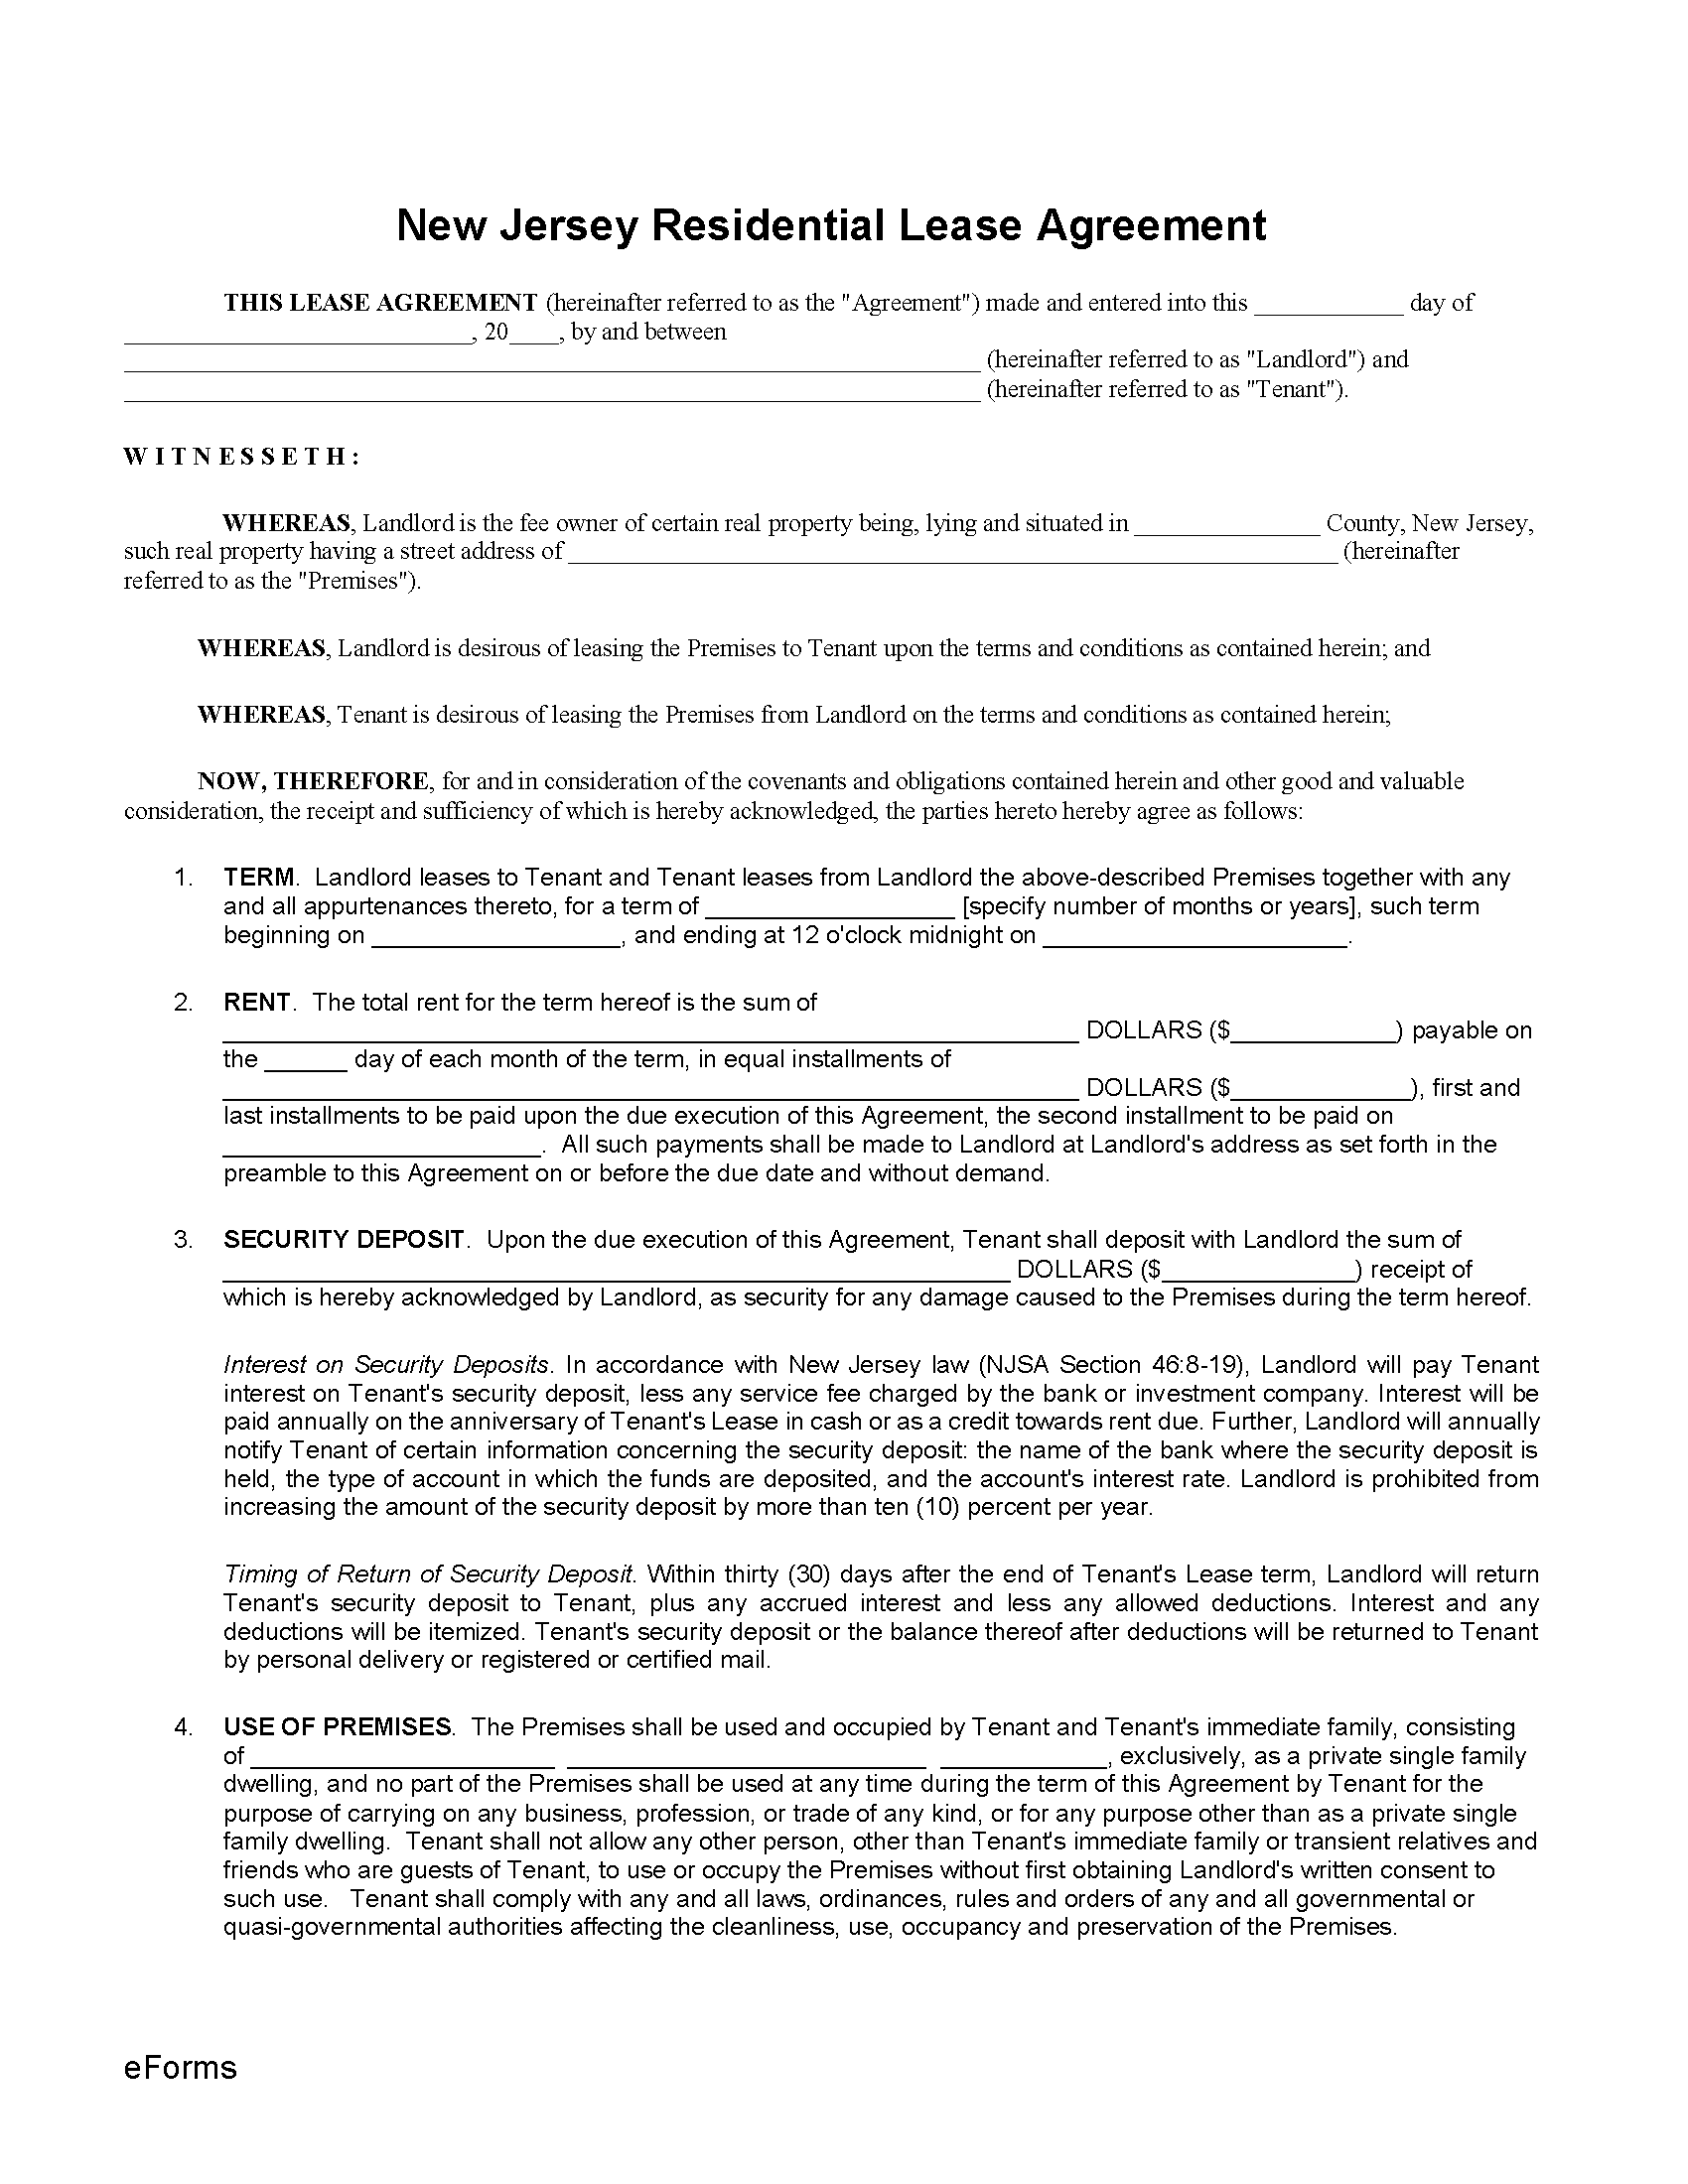 Free New Jersey Standard Residential Lease Agreement Form Word PDF 